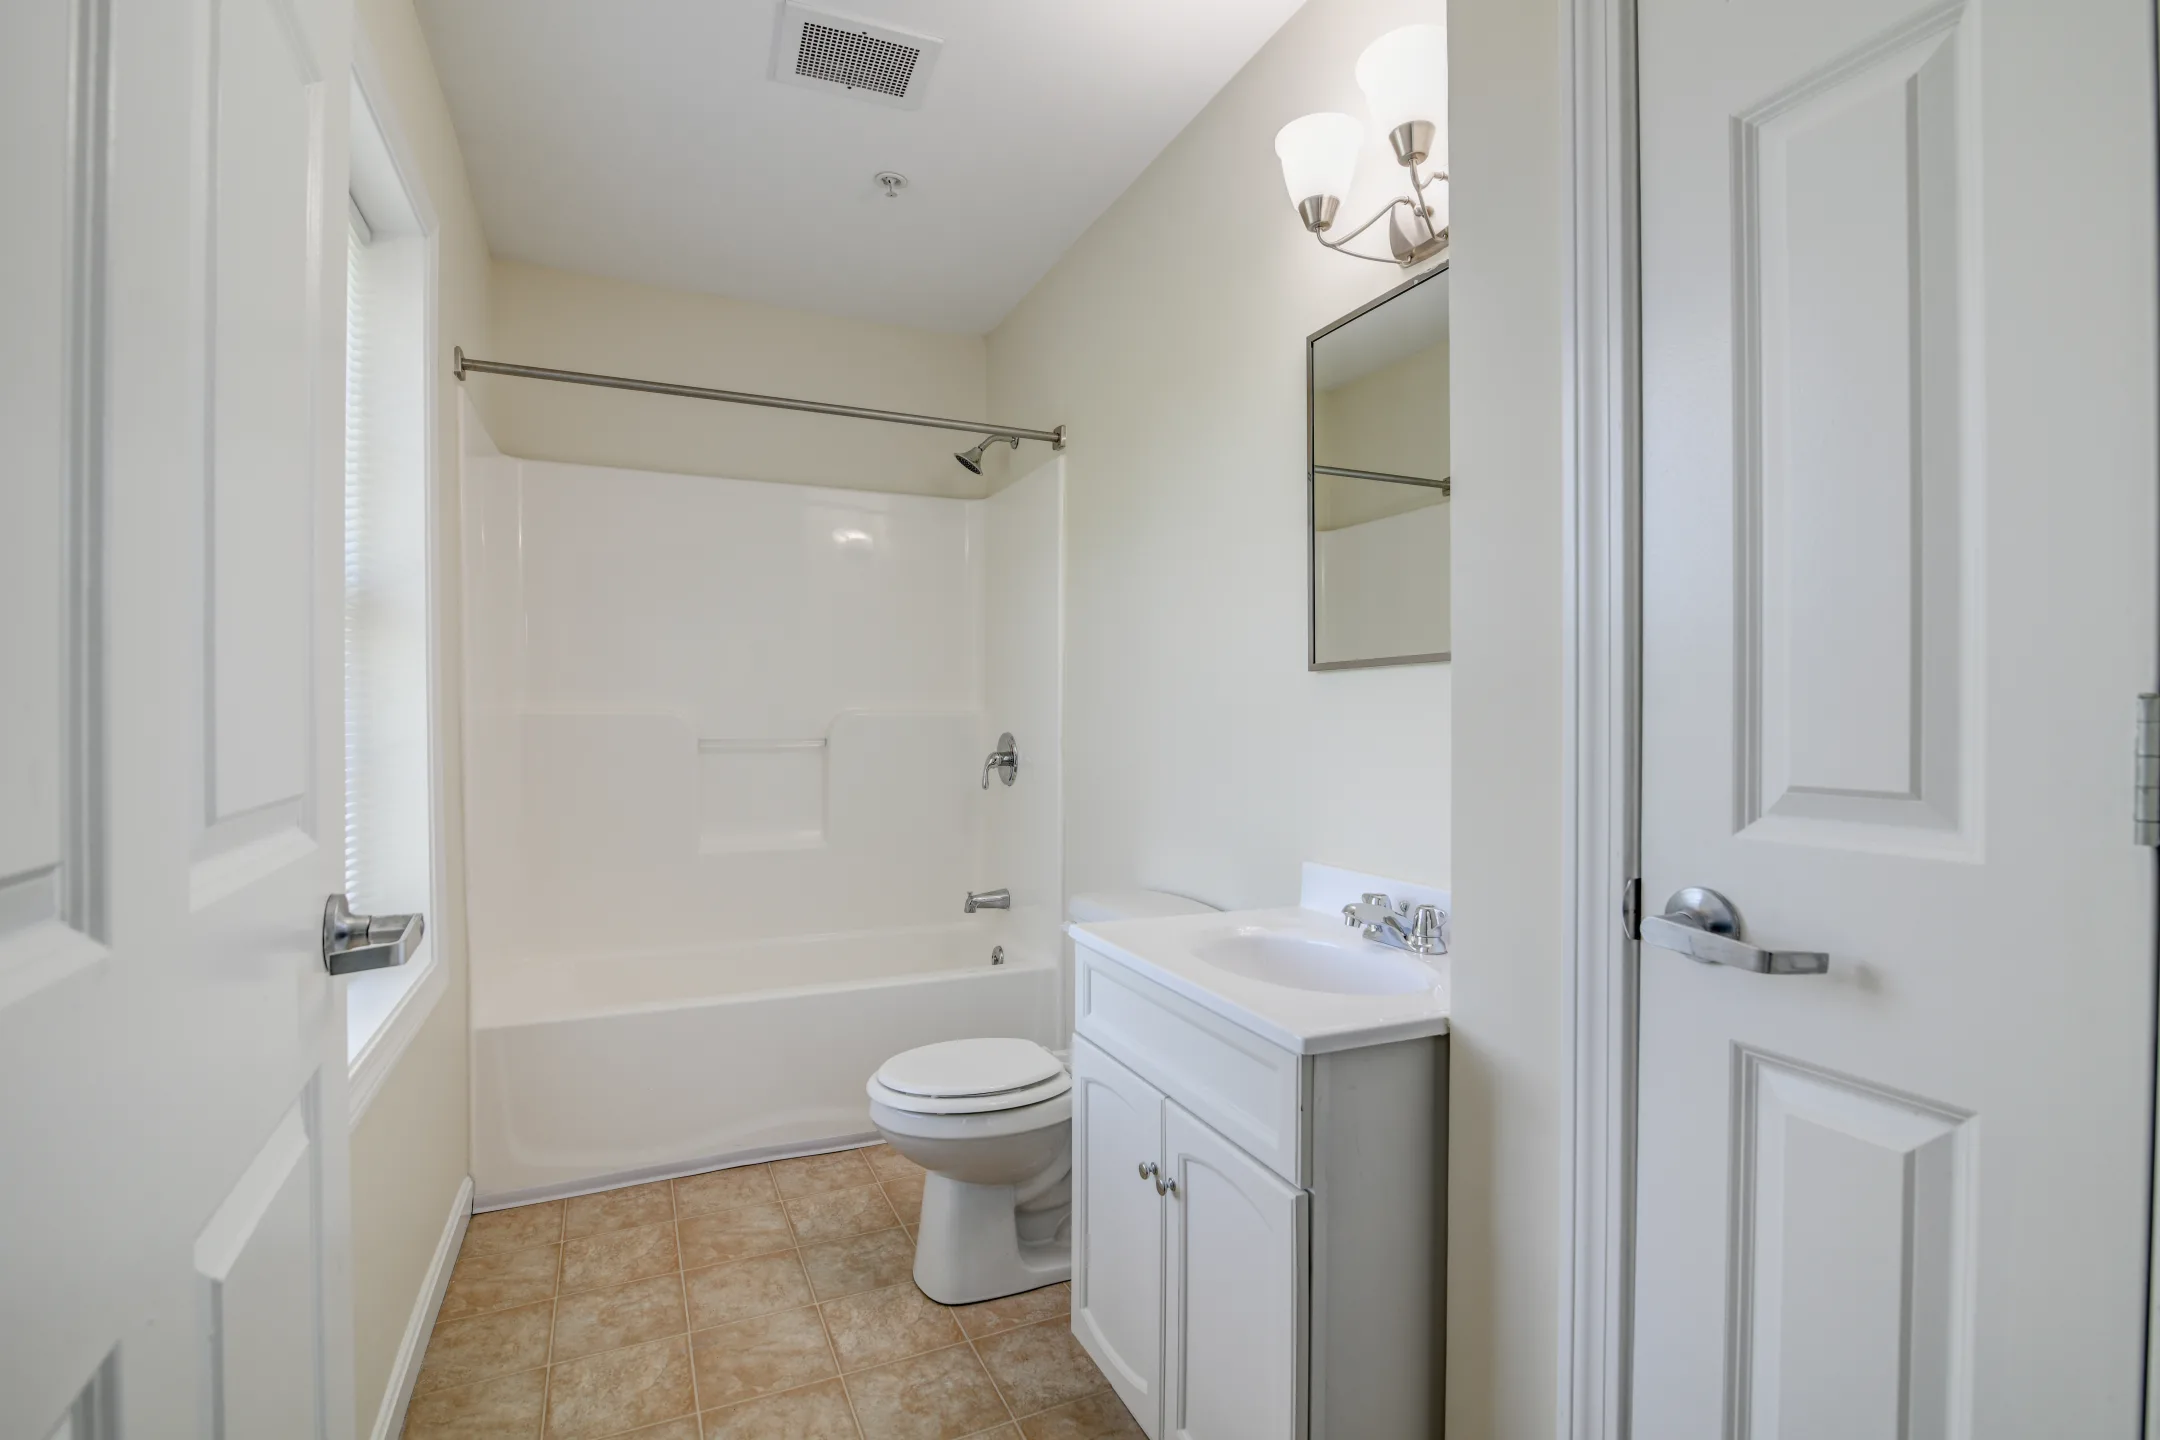 Bathroom - Redstone Apartments and Single Family Homes - Manchester, NH